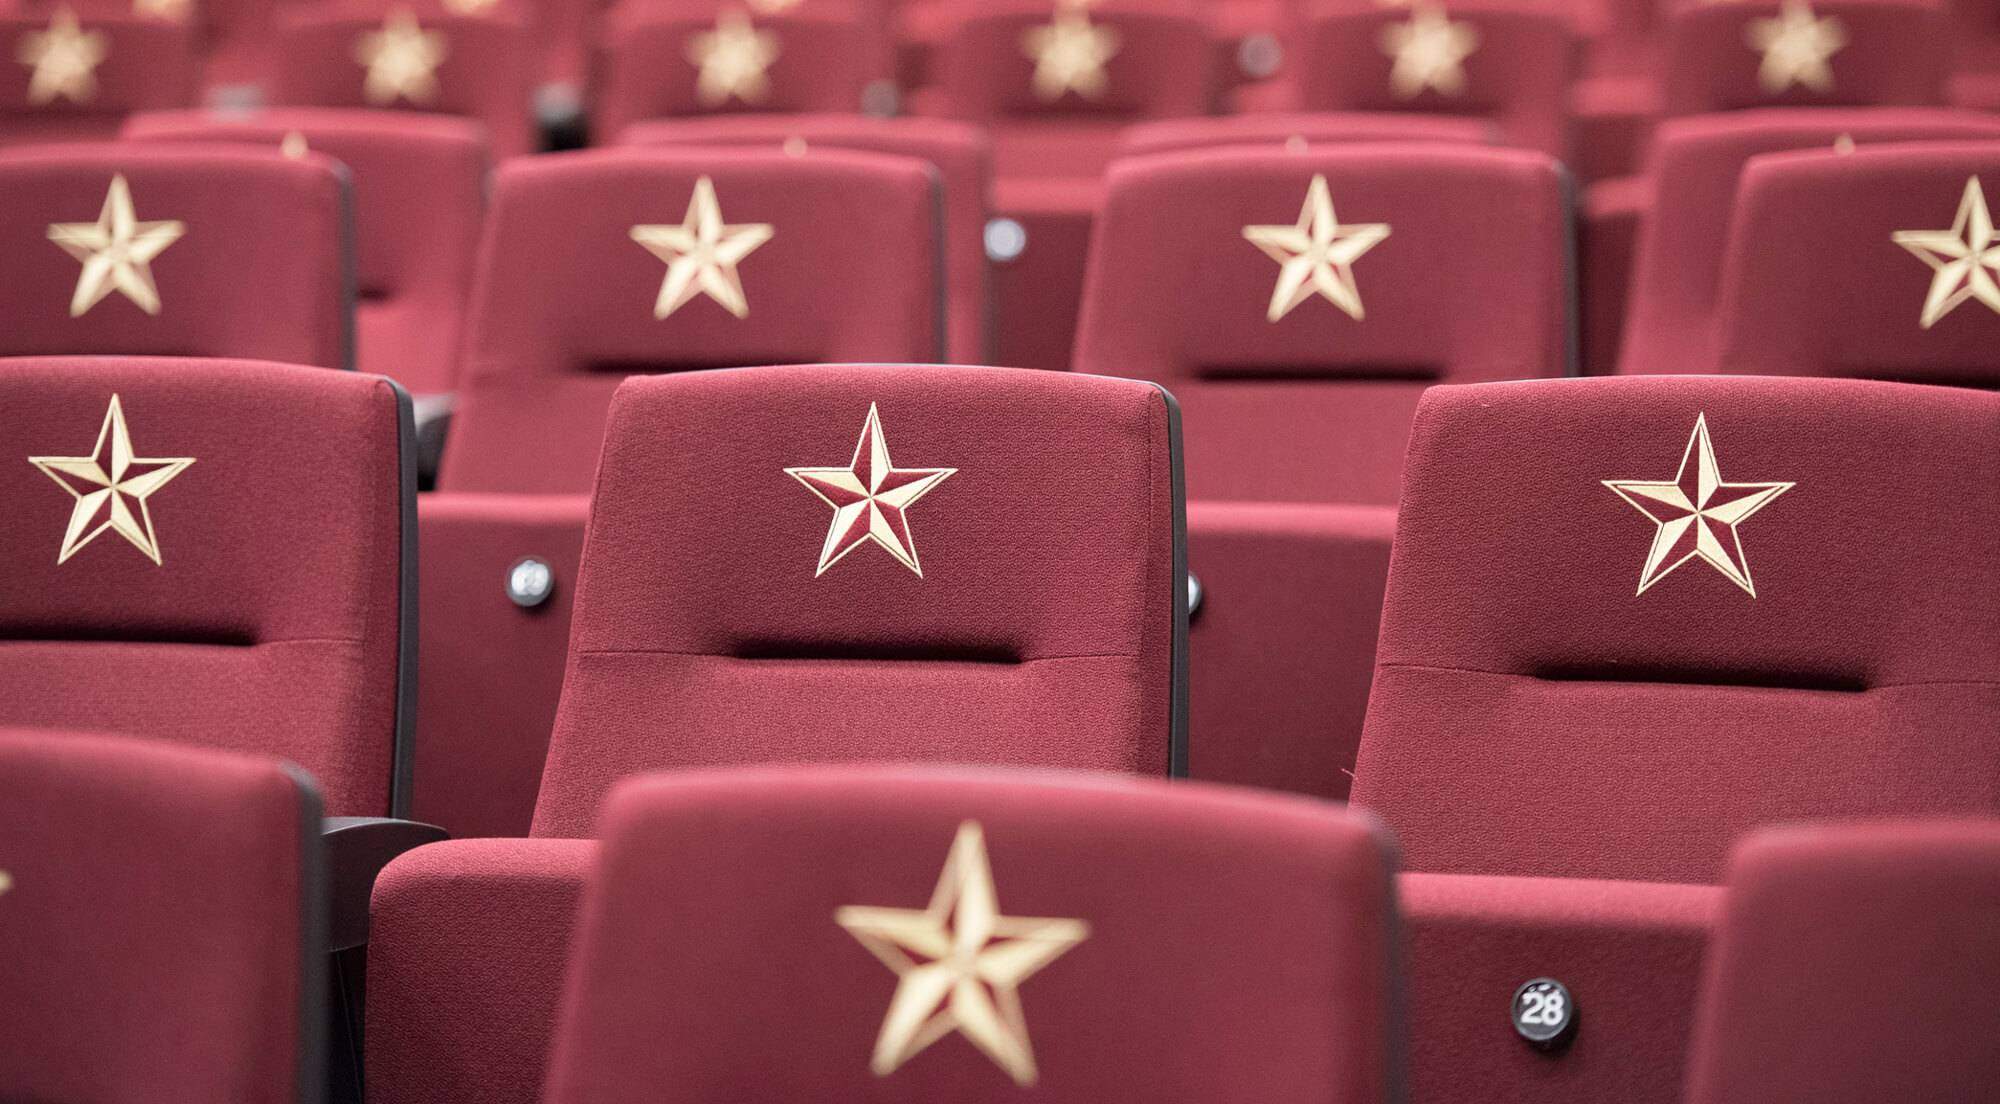 Image of TXST Teaching Theatre Seats wtih Gold Stars on Seats